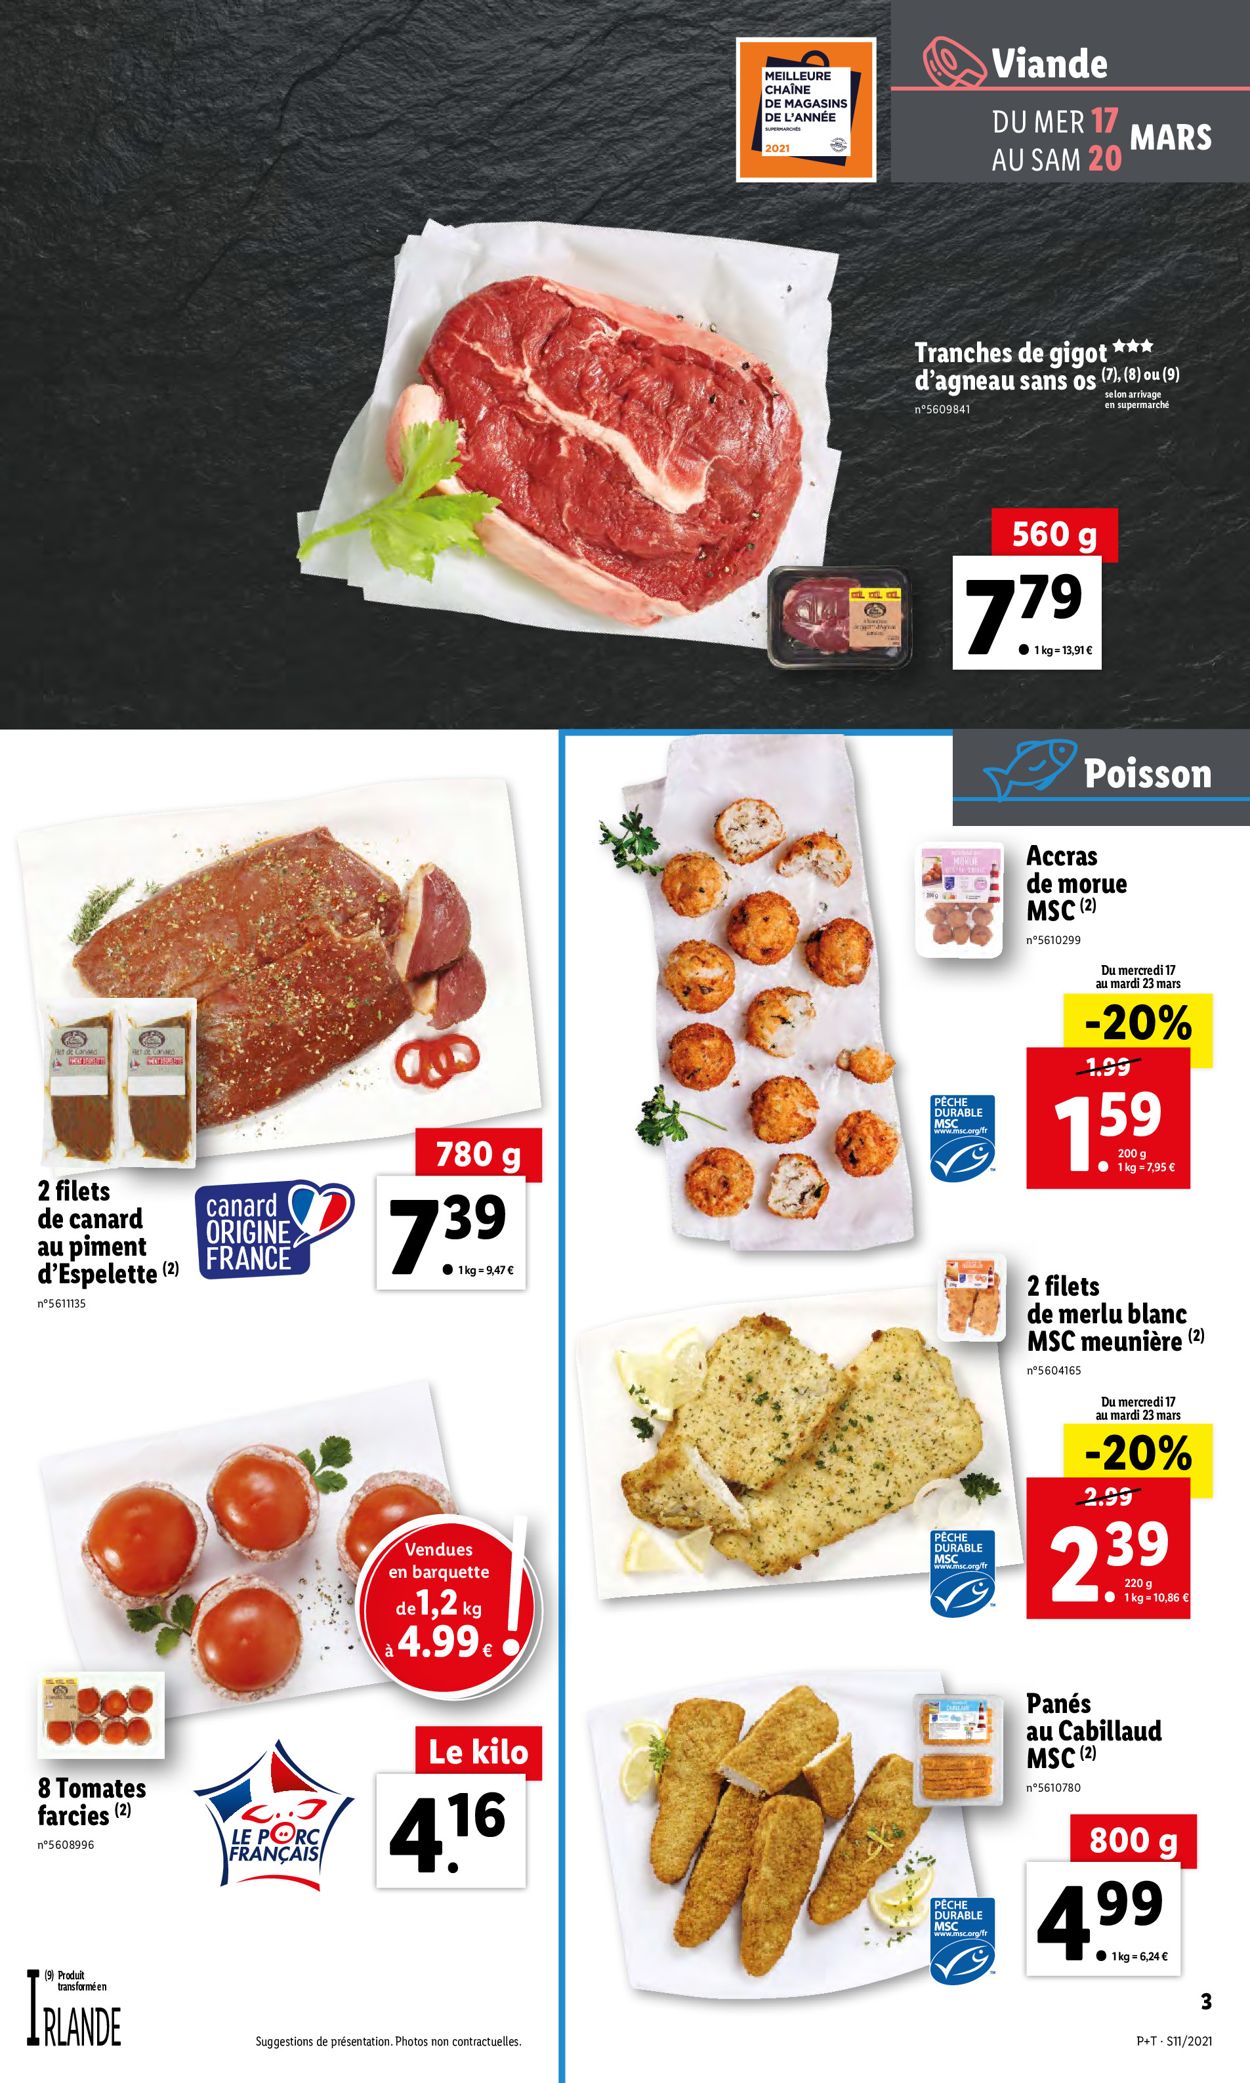 Lidl Catalogue - 17.03-23.03.2021 (Page 3)